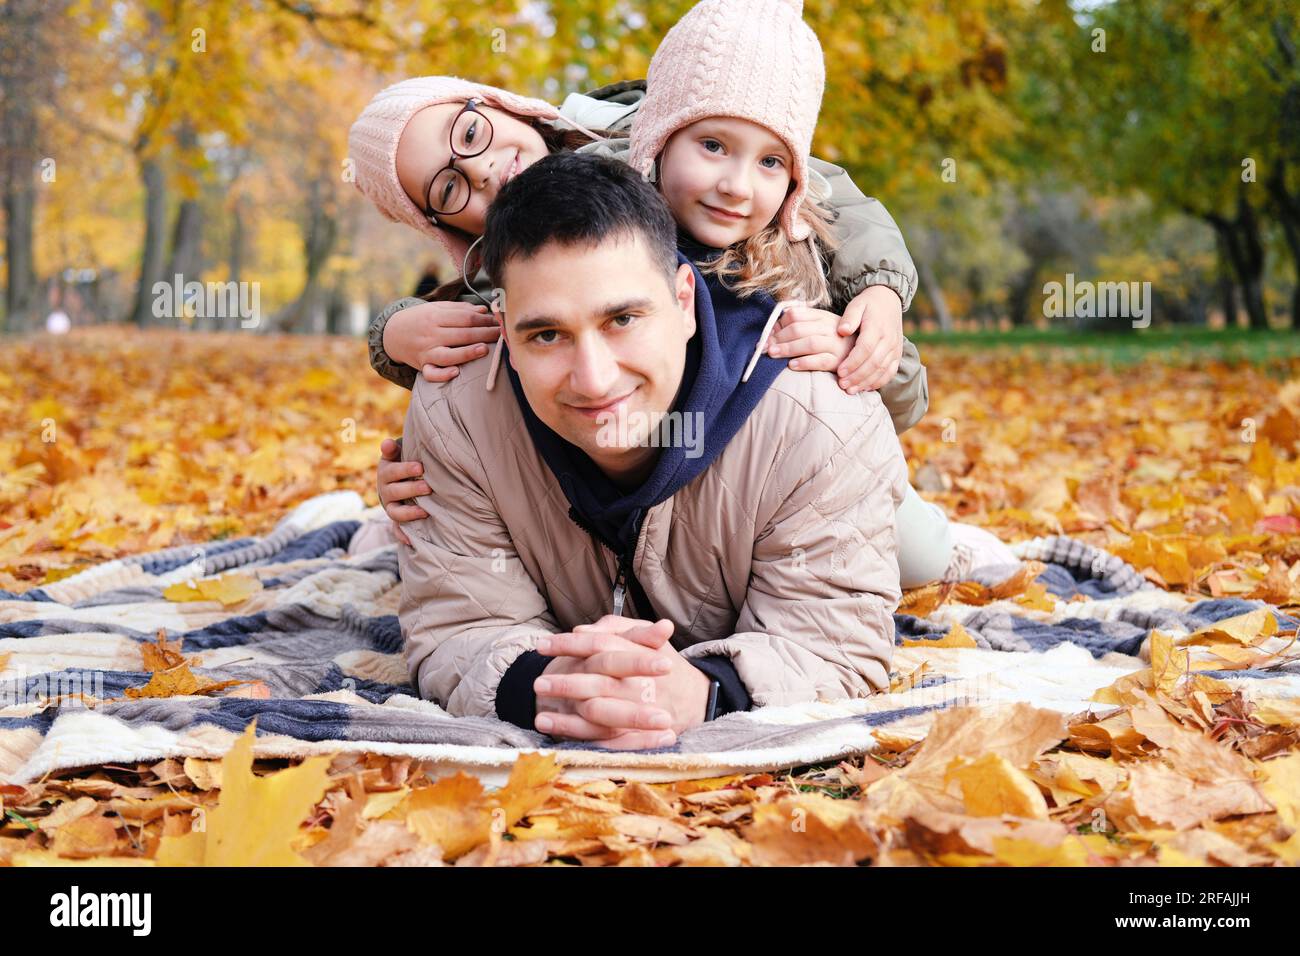 Family day in autumn park. The twin girls lie on their father's back. Father and sisters smiling and looking at the camera. Horizontal photo Stock Photo